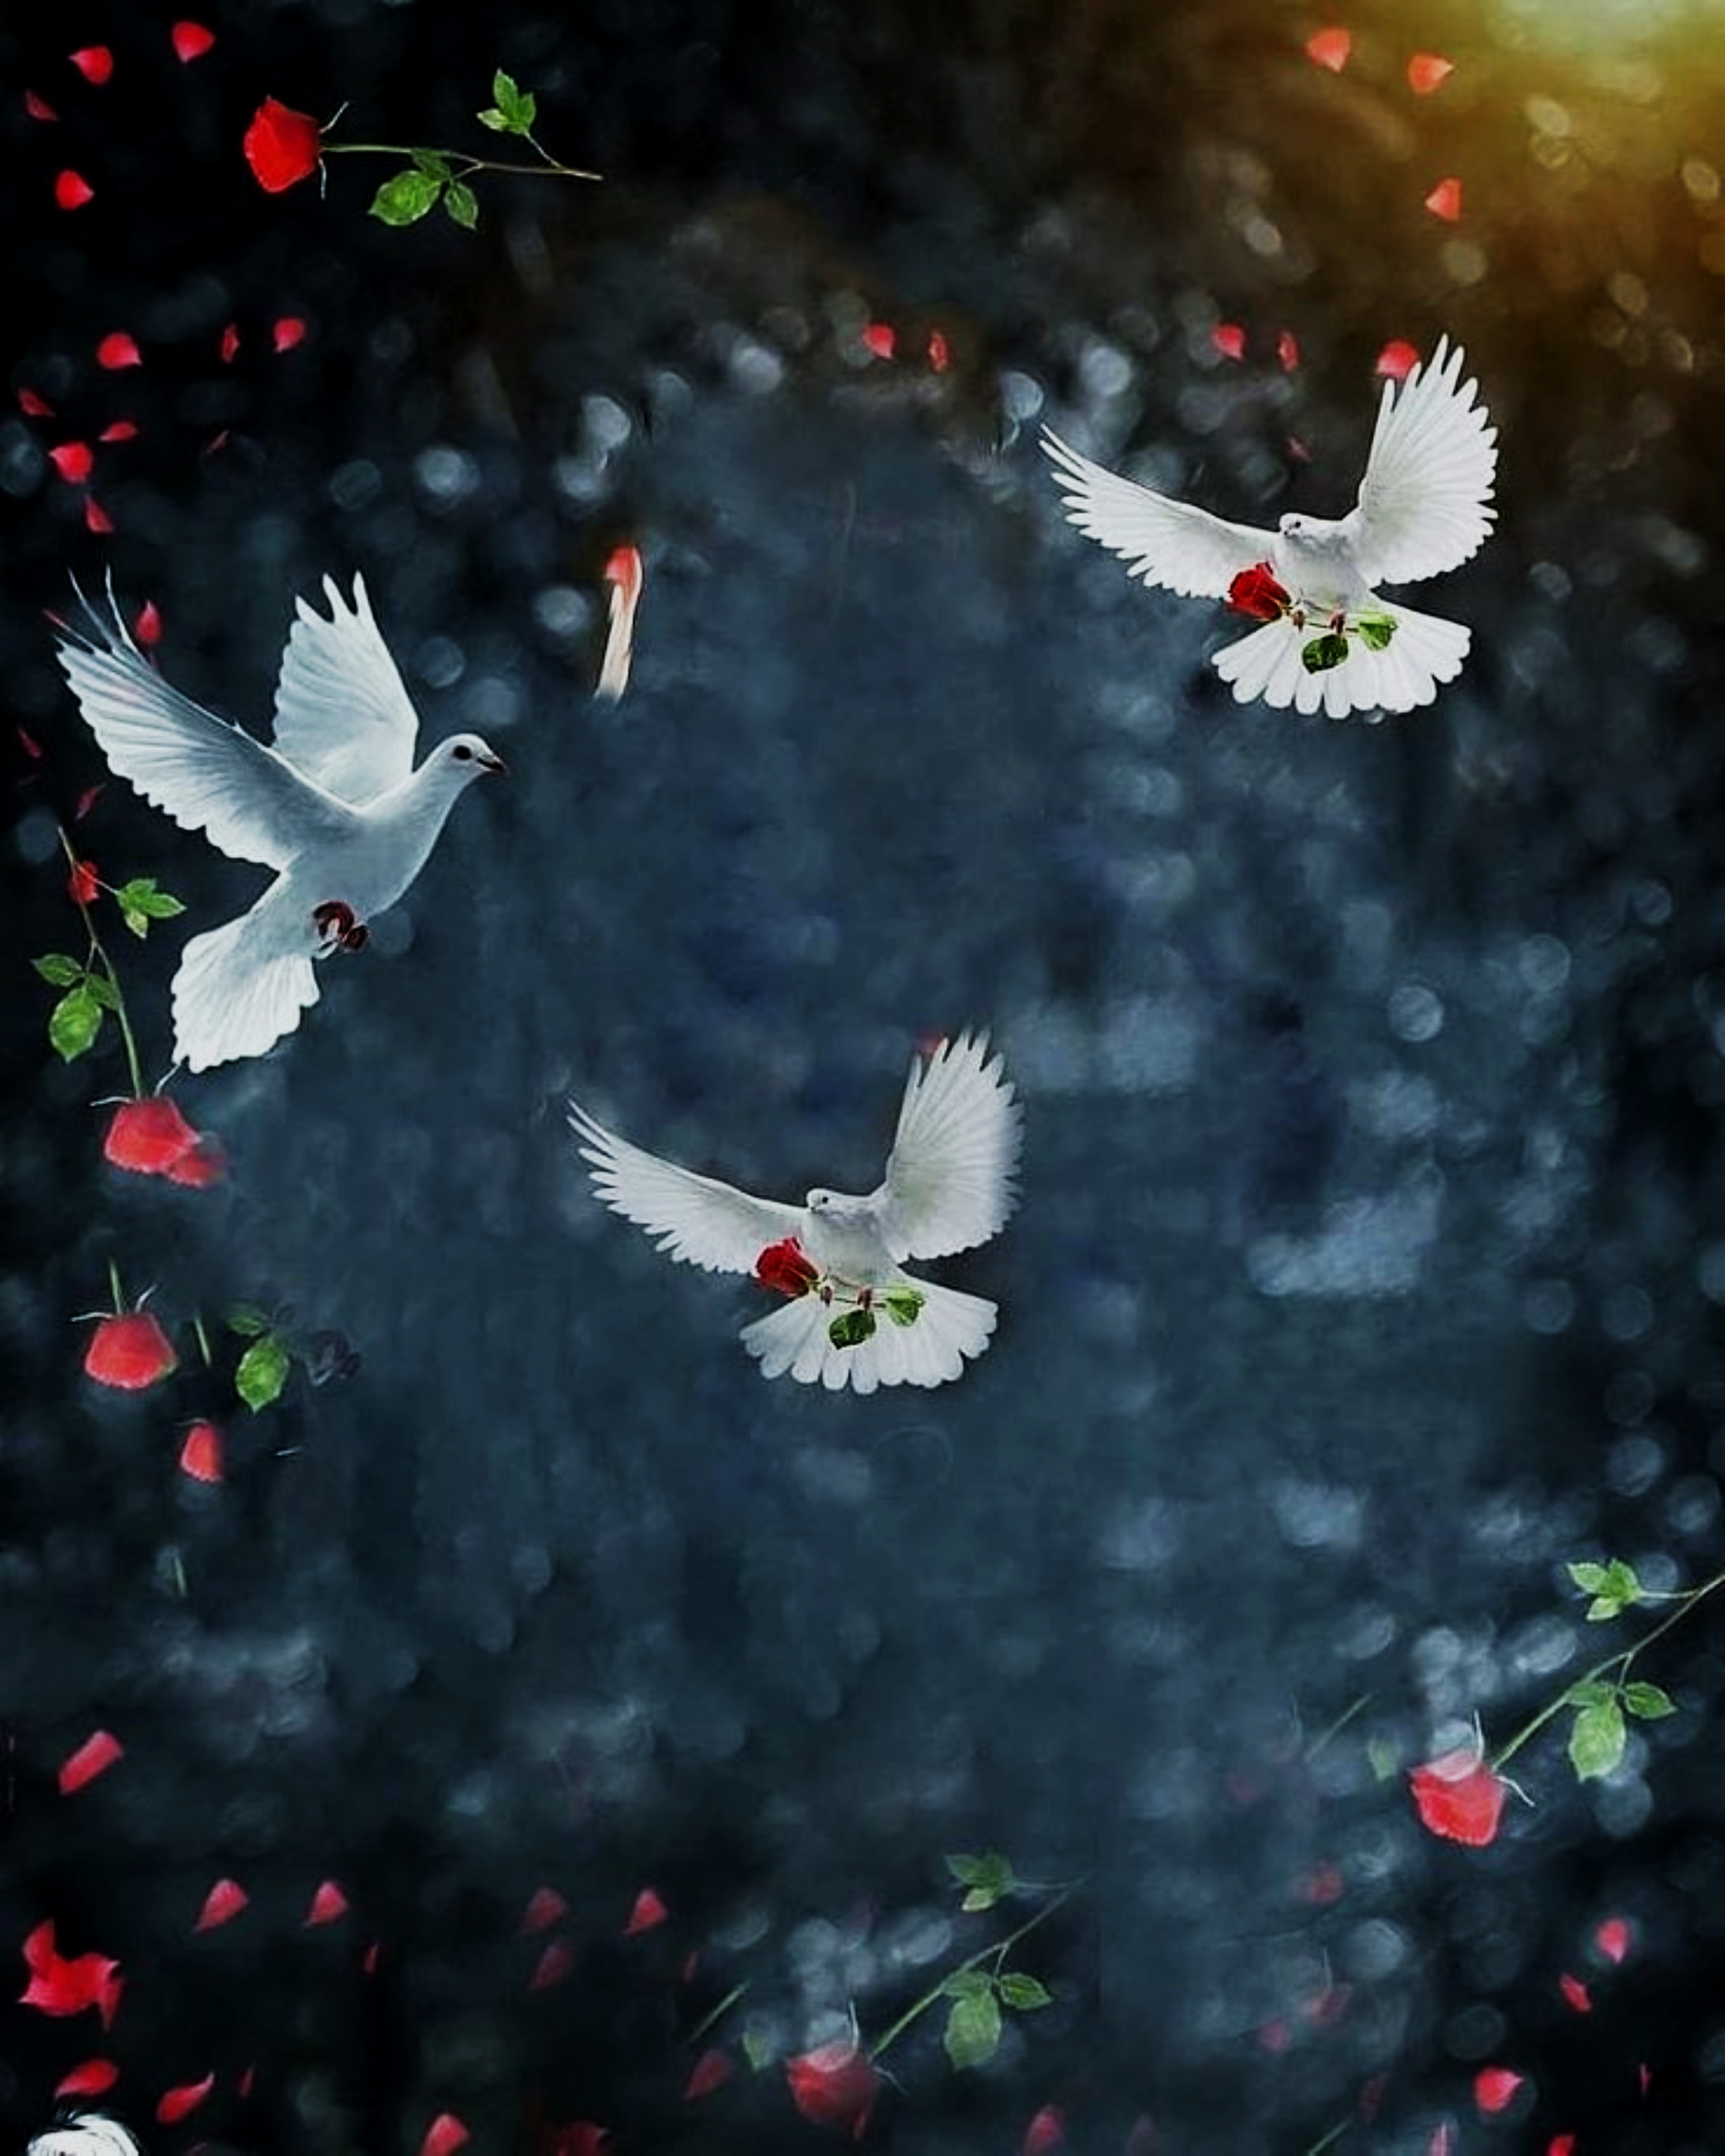 You are currently viewing Birds picsart editing background download free